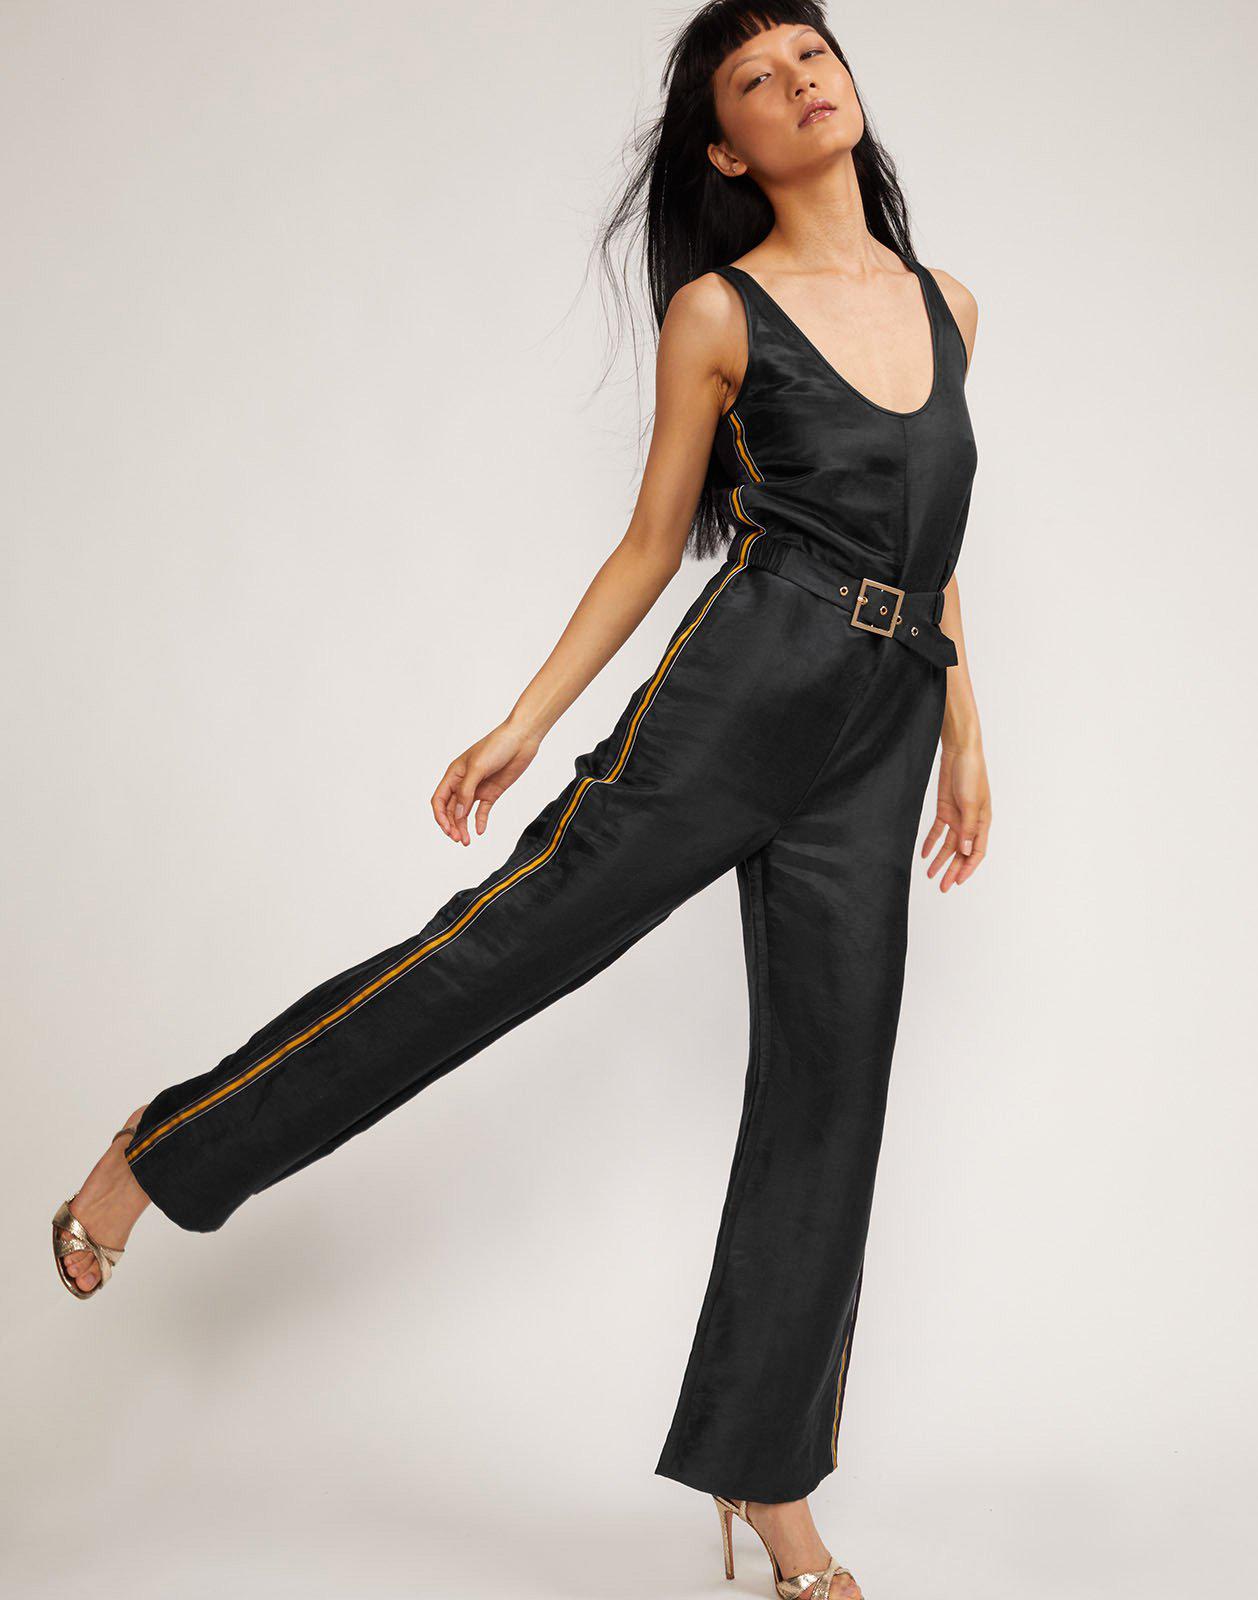 Cynthia Rowley Synthetic Dylan Wide Leg Jumpsuit in Black - Lyst